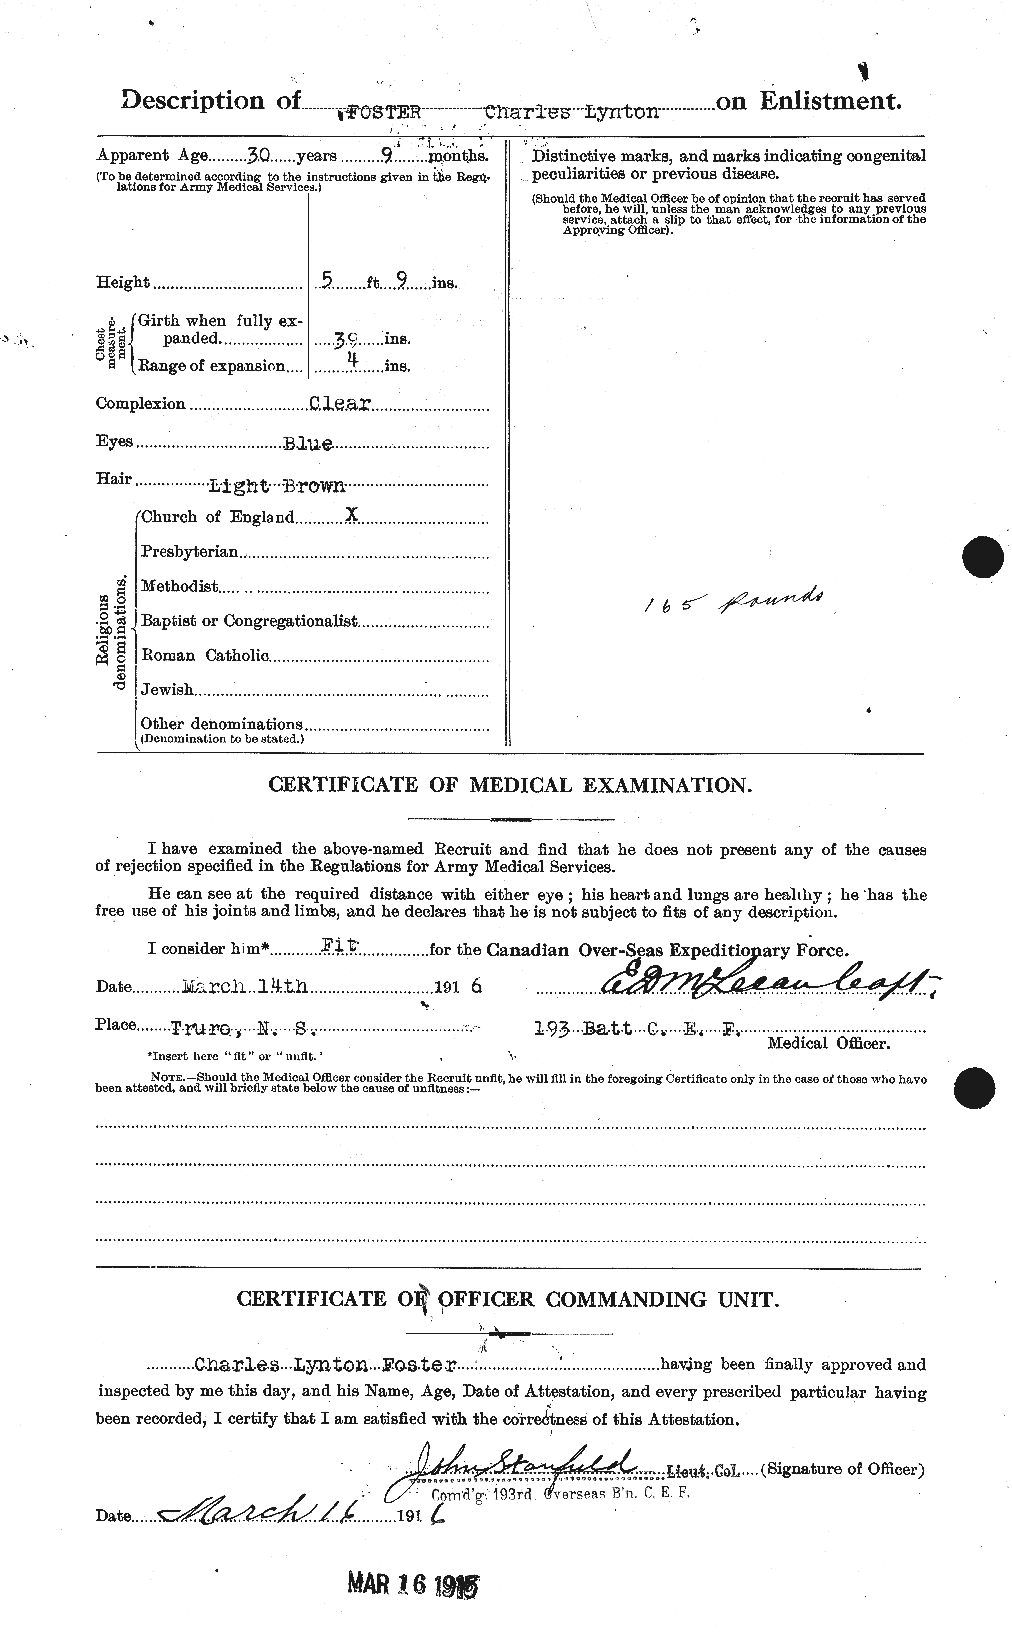 Personnel Records of the First World War - CEF 330524b